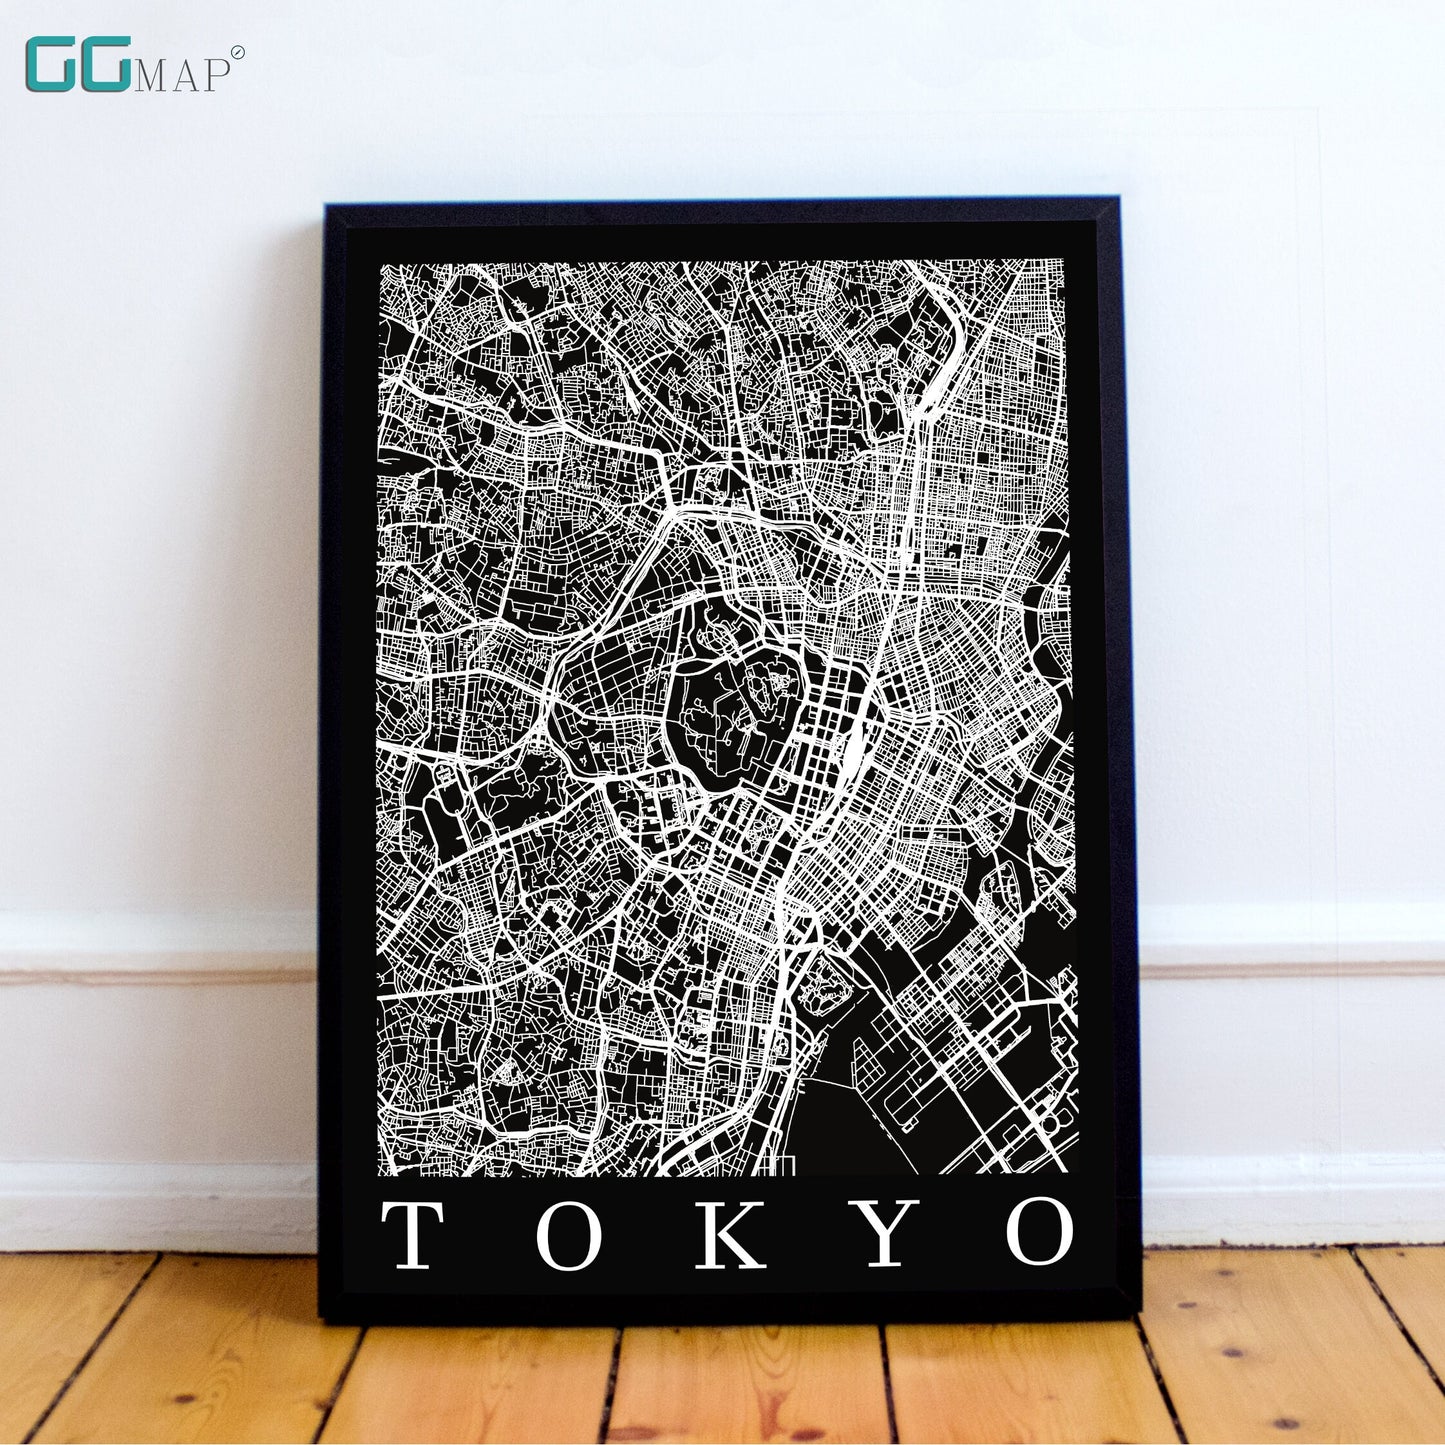 City map of TOKYO - Home Decor - Wall decor -Office map - Travel map- Print map -Poster city map - Tokyo map- GeoGIS Studio -Tokyo black map